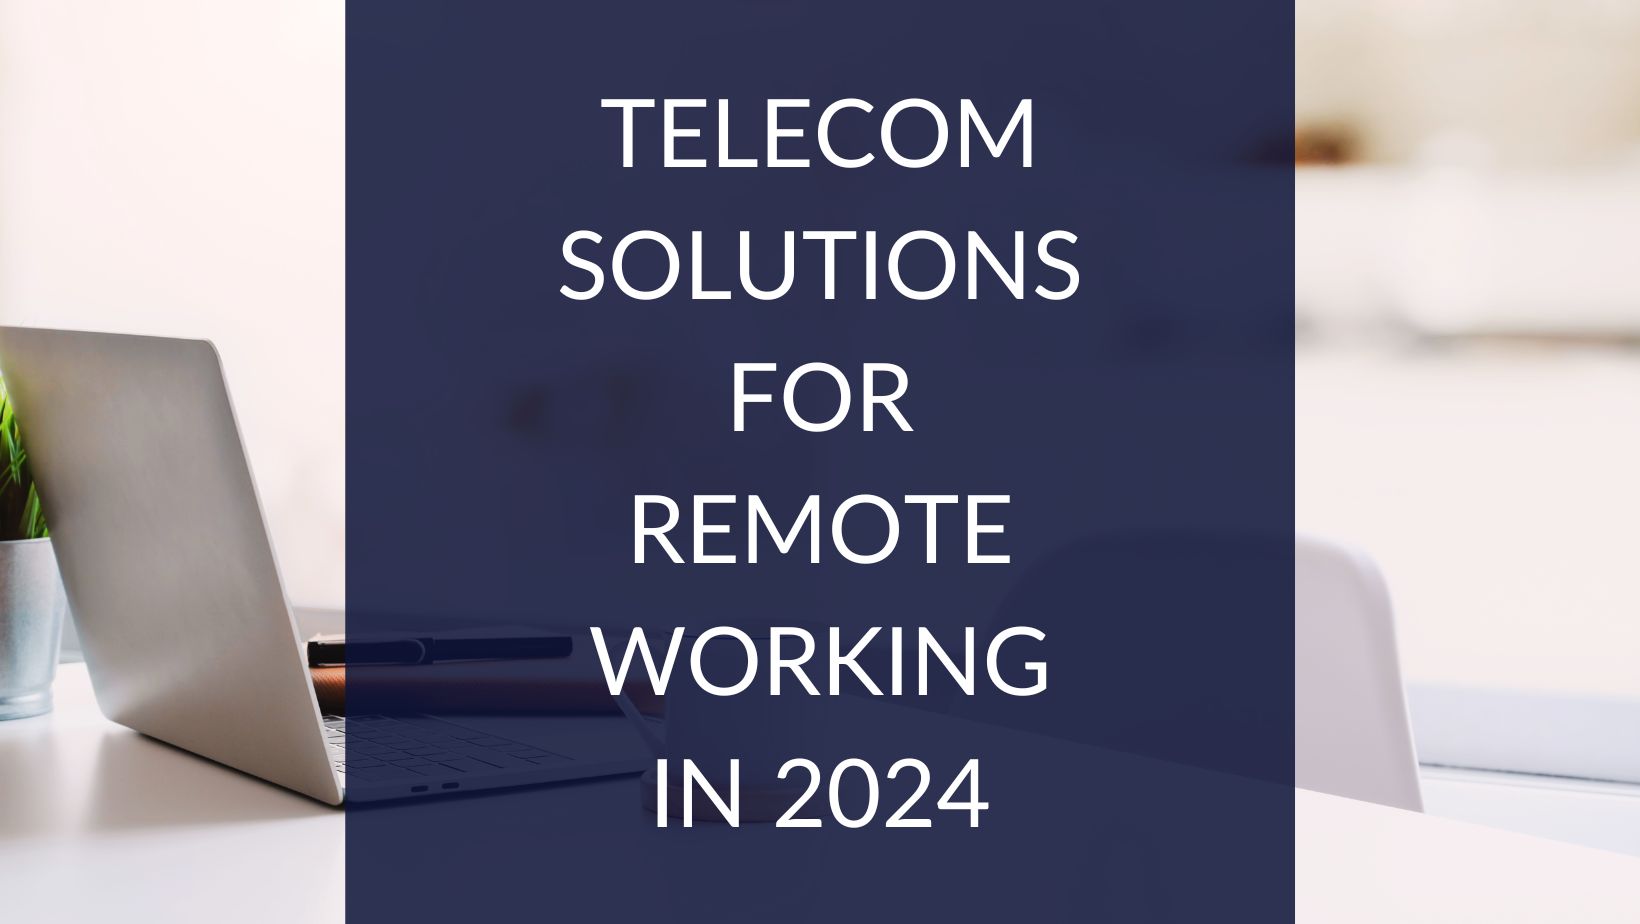 Blog: Telecom solutions for remote working in 2024